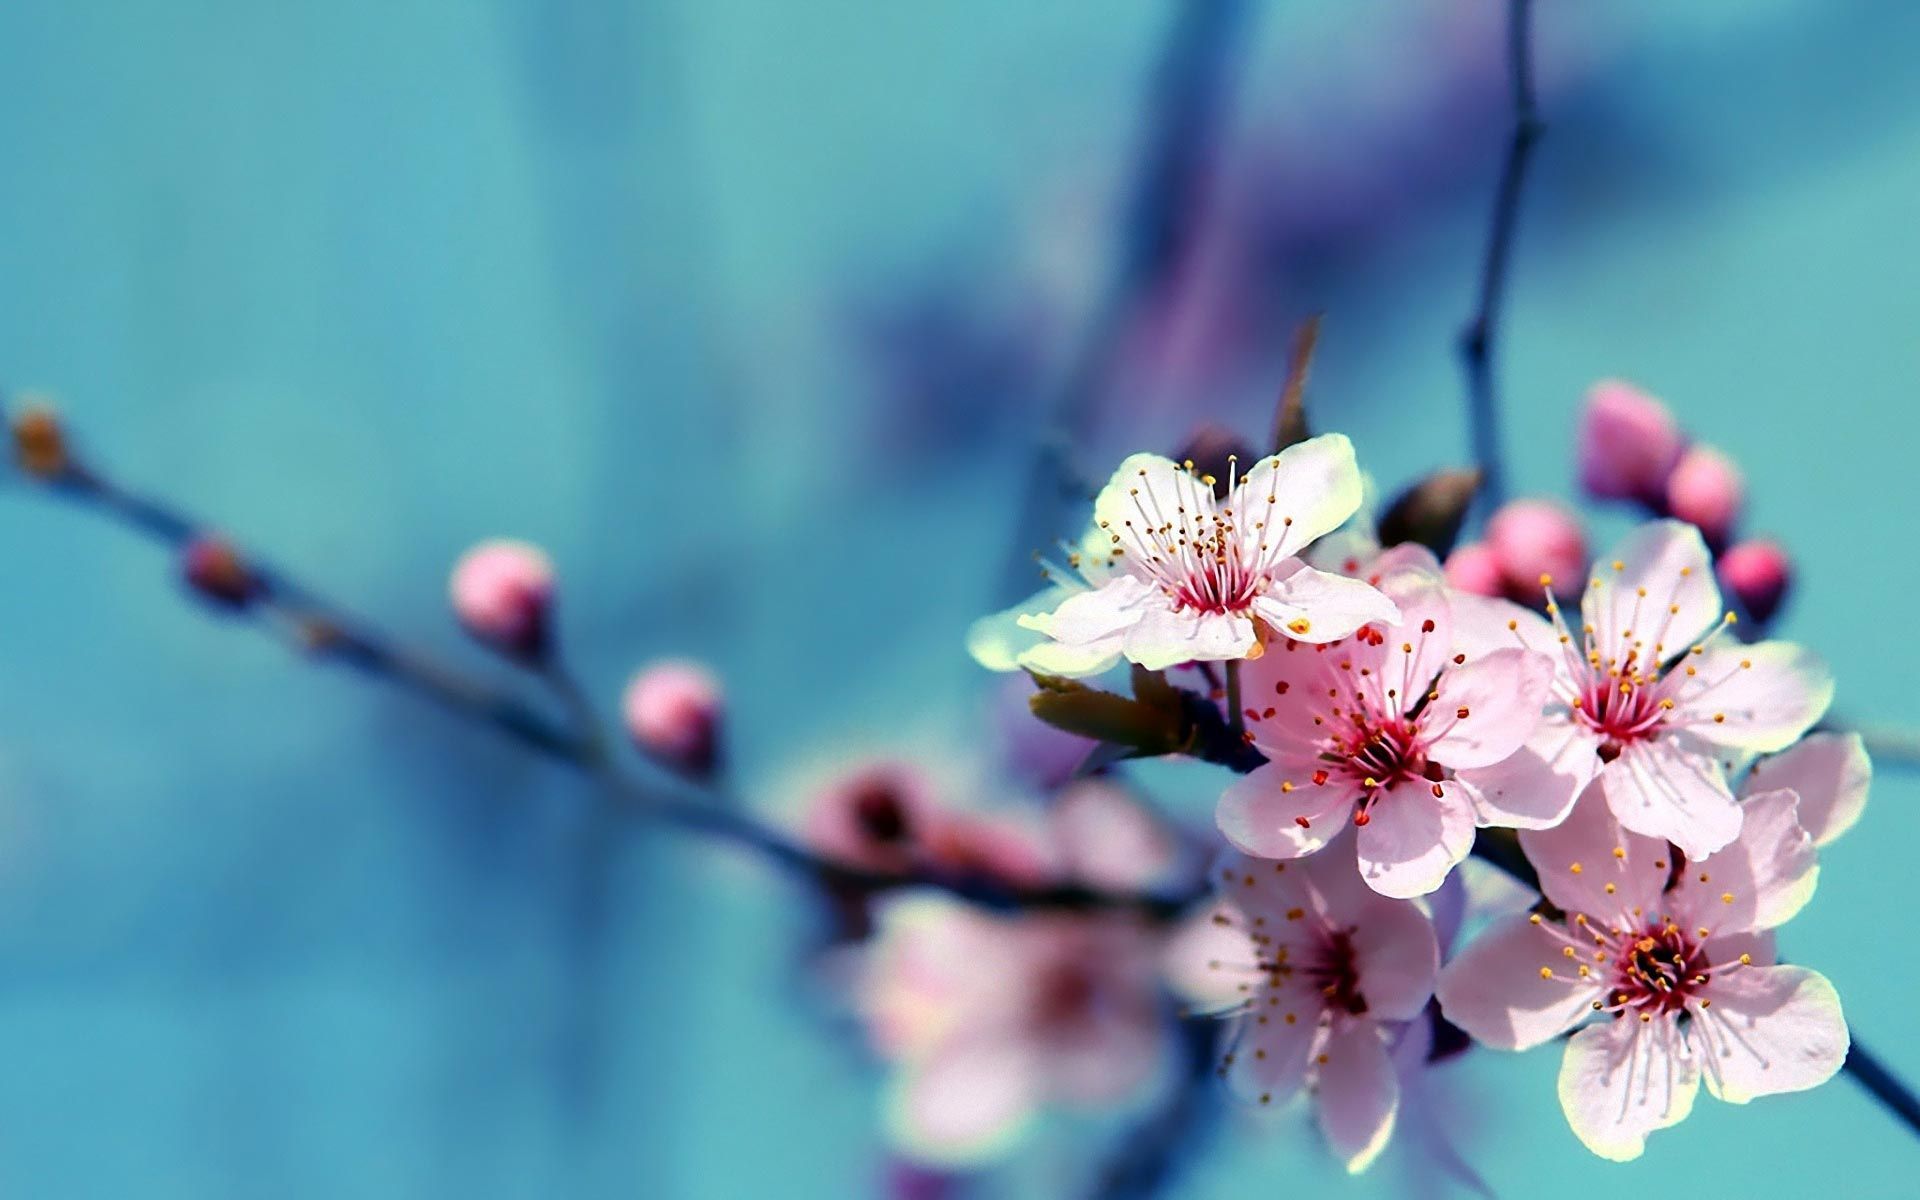 BEAUTIFUL FLOWER WALLPAPERS FREE TO DOWNLOAD. Cherry blossom